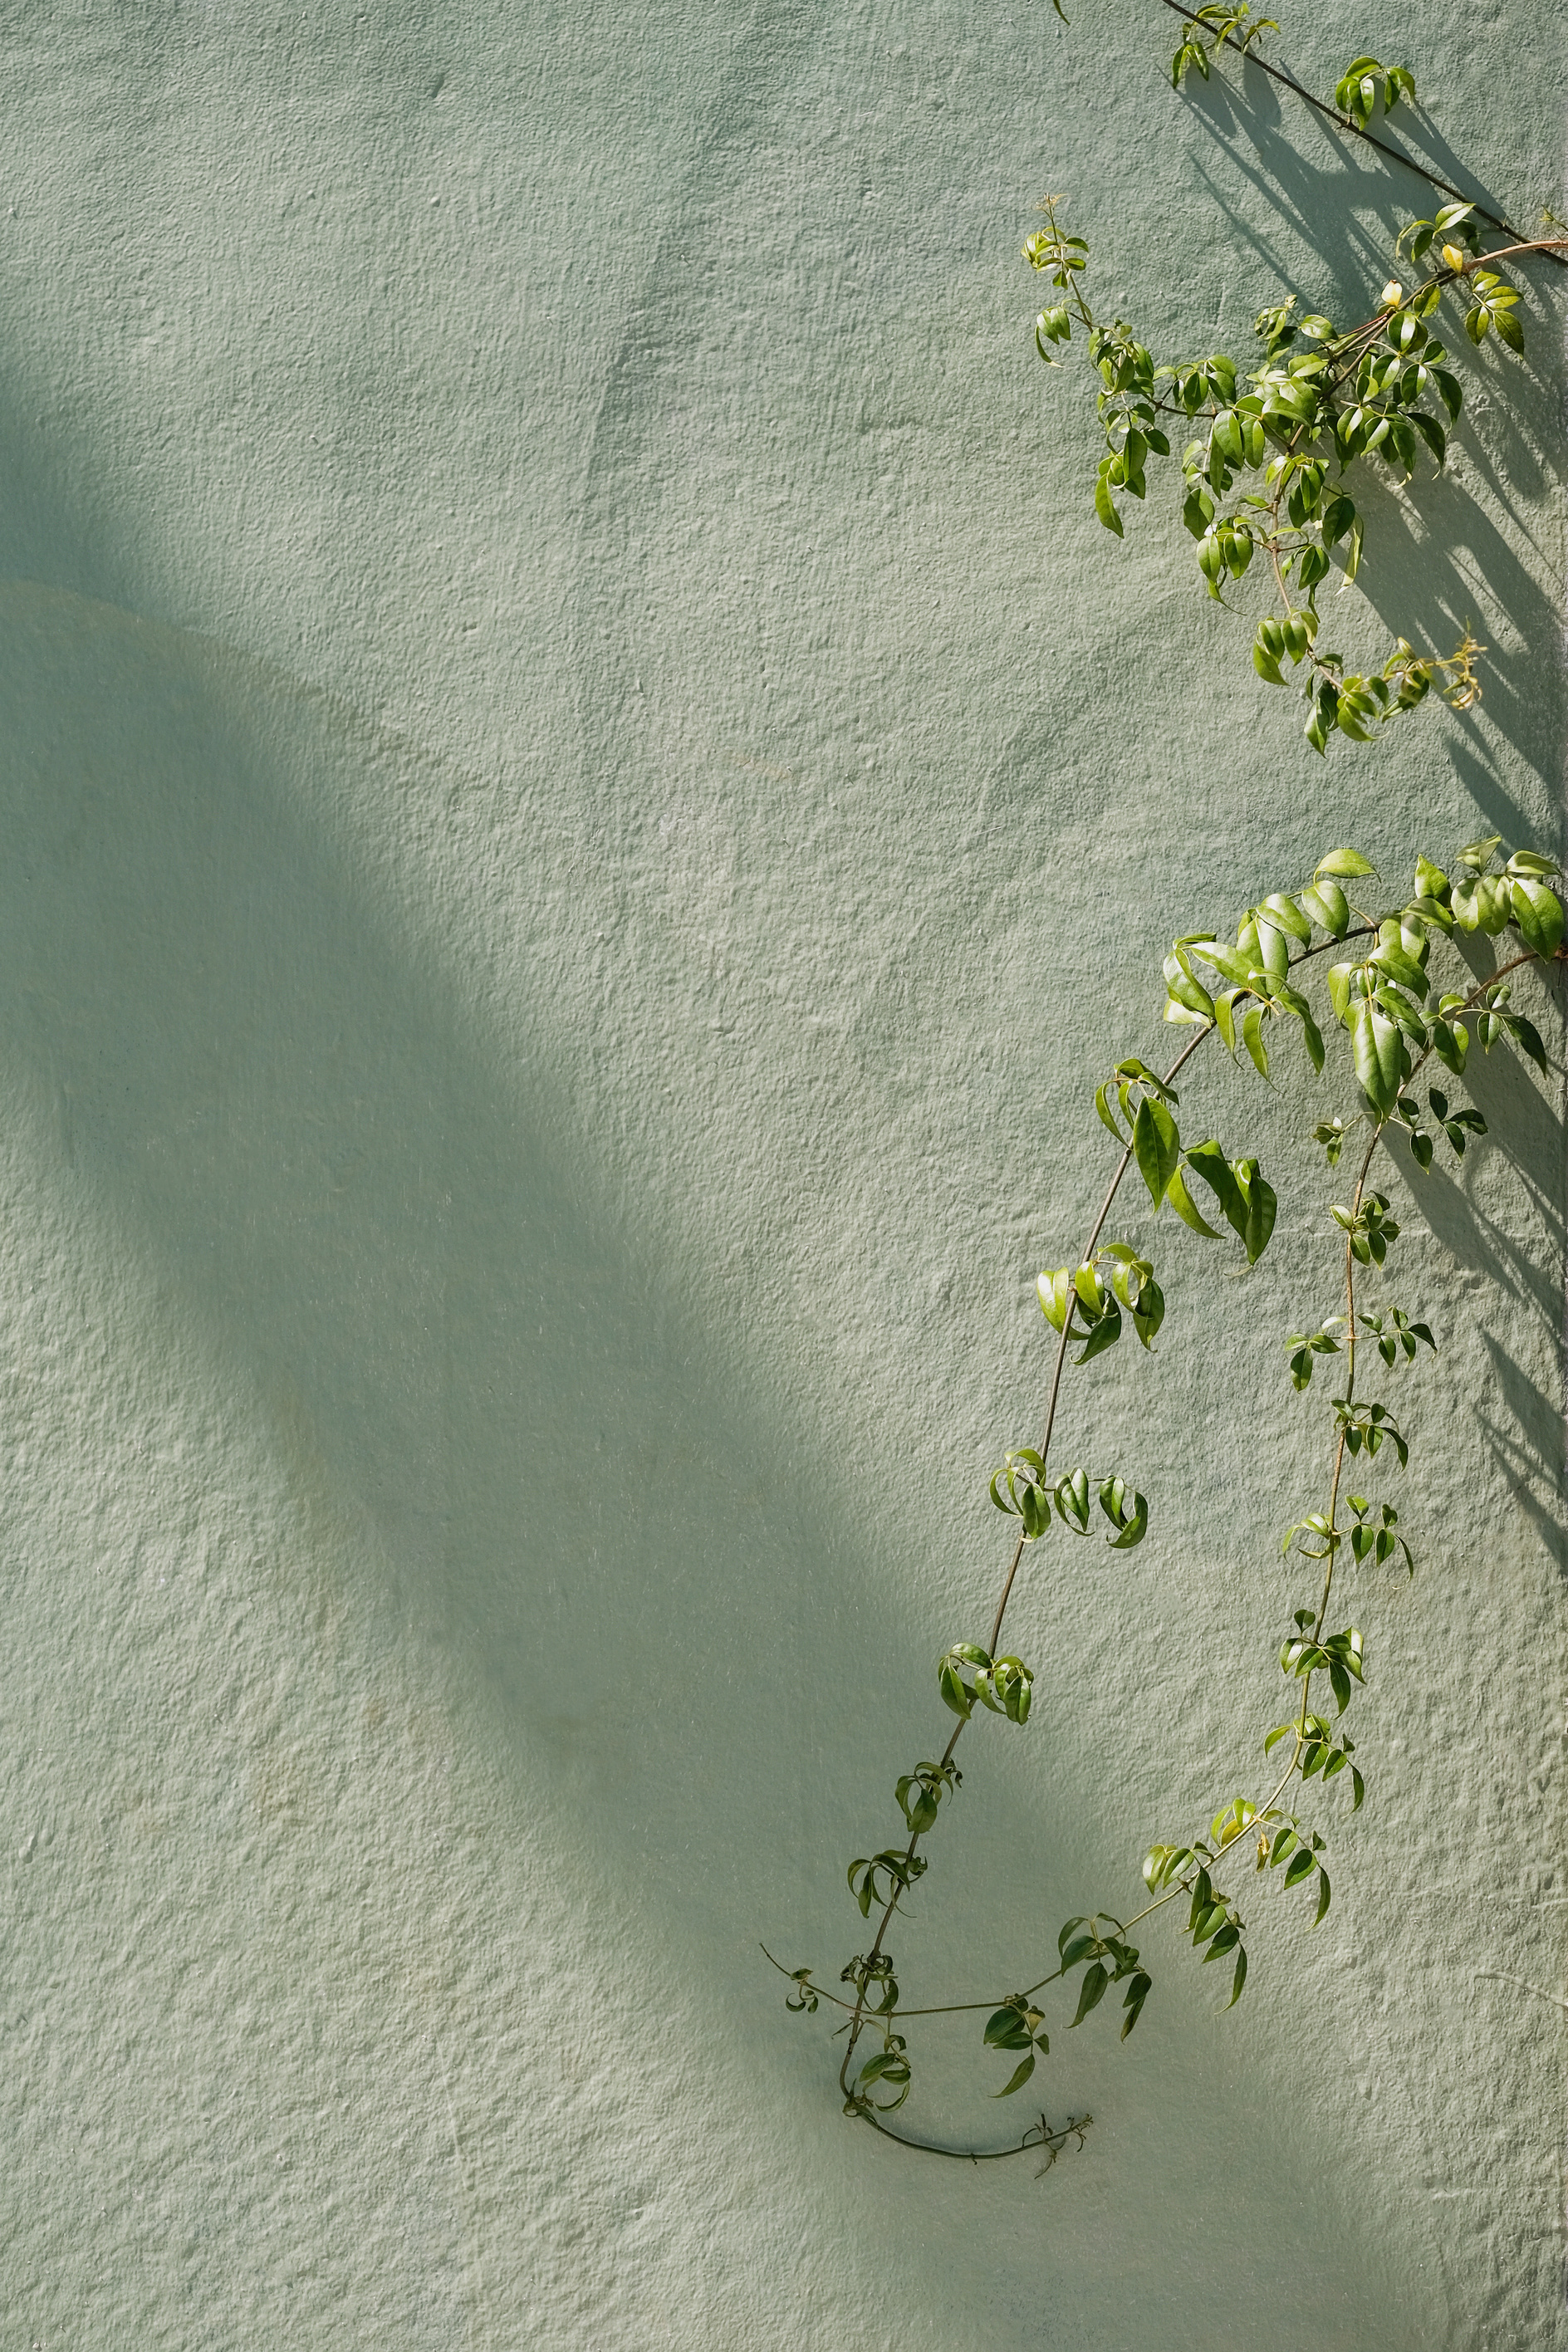 Vines on Concrete Wall 